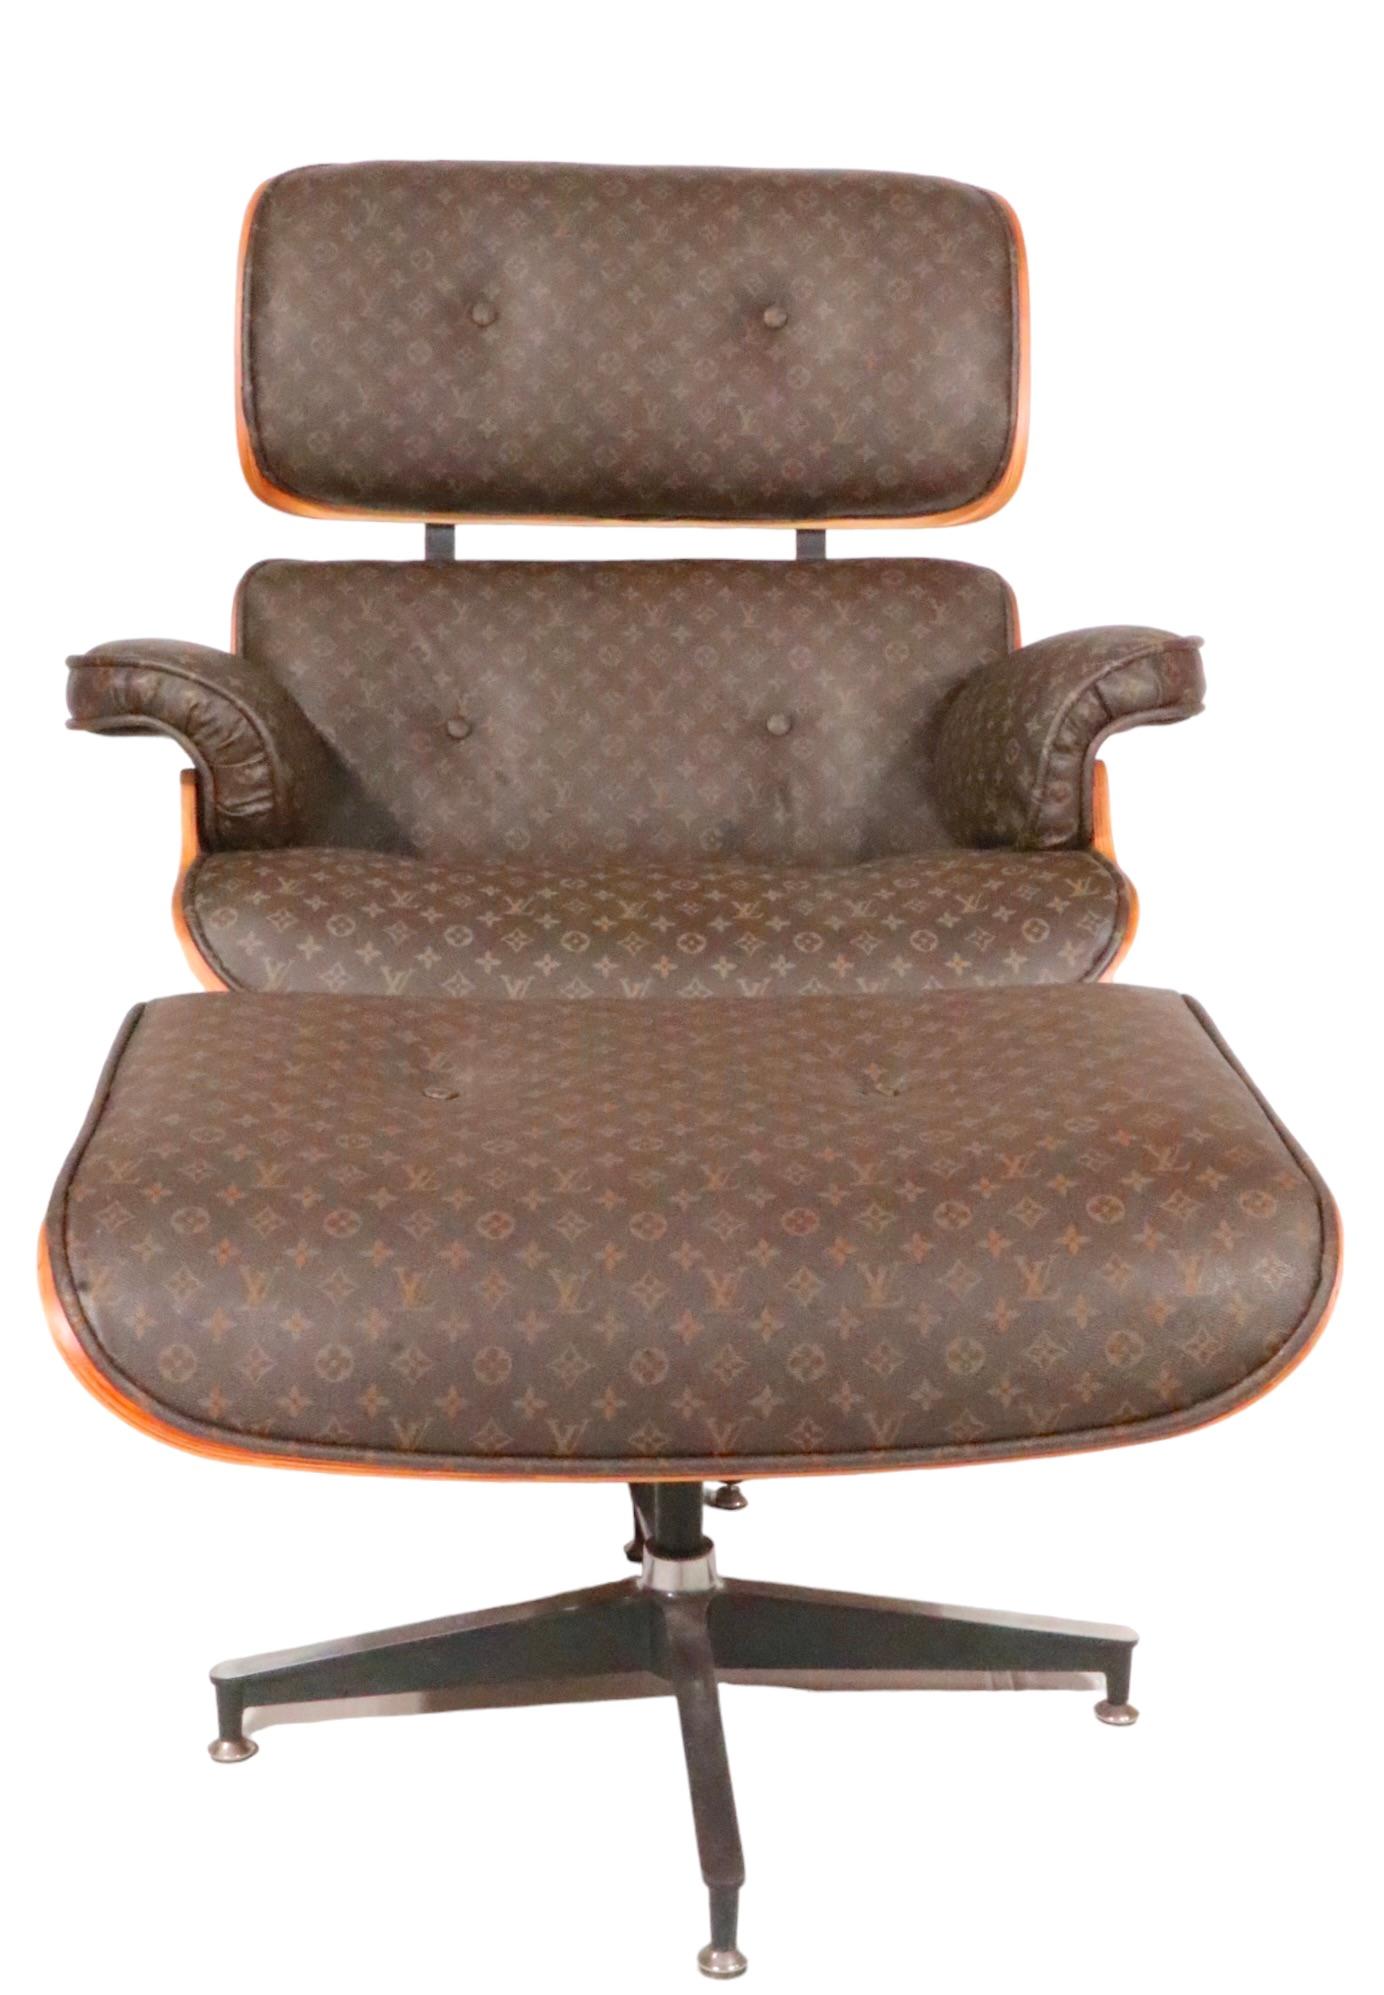 Eames Herman Miller Contura 670/671 Chair and Ottoman in Louis Vuitton Fabric For Sale 3